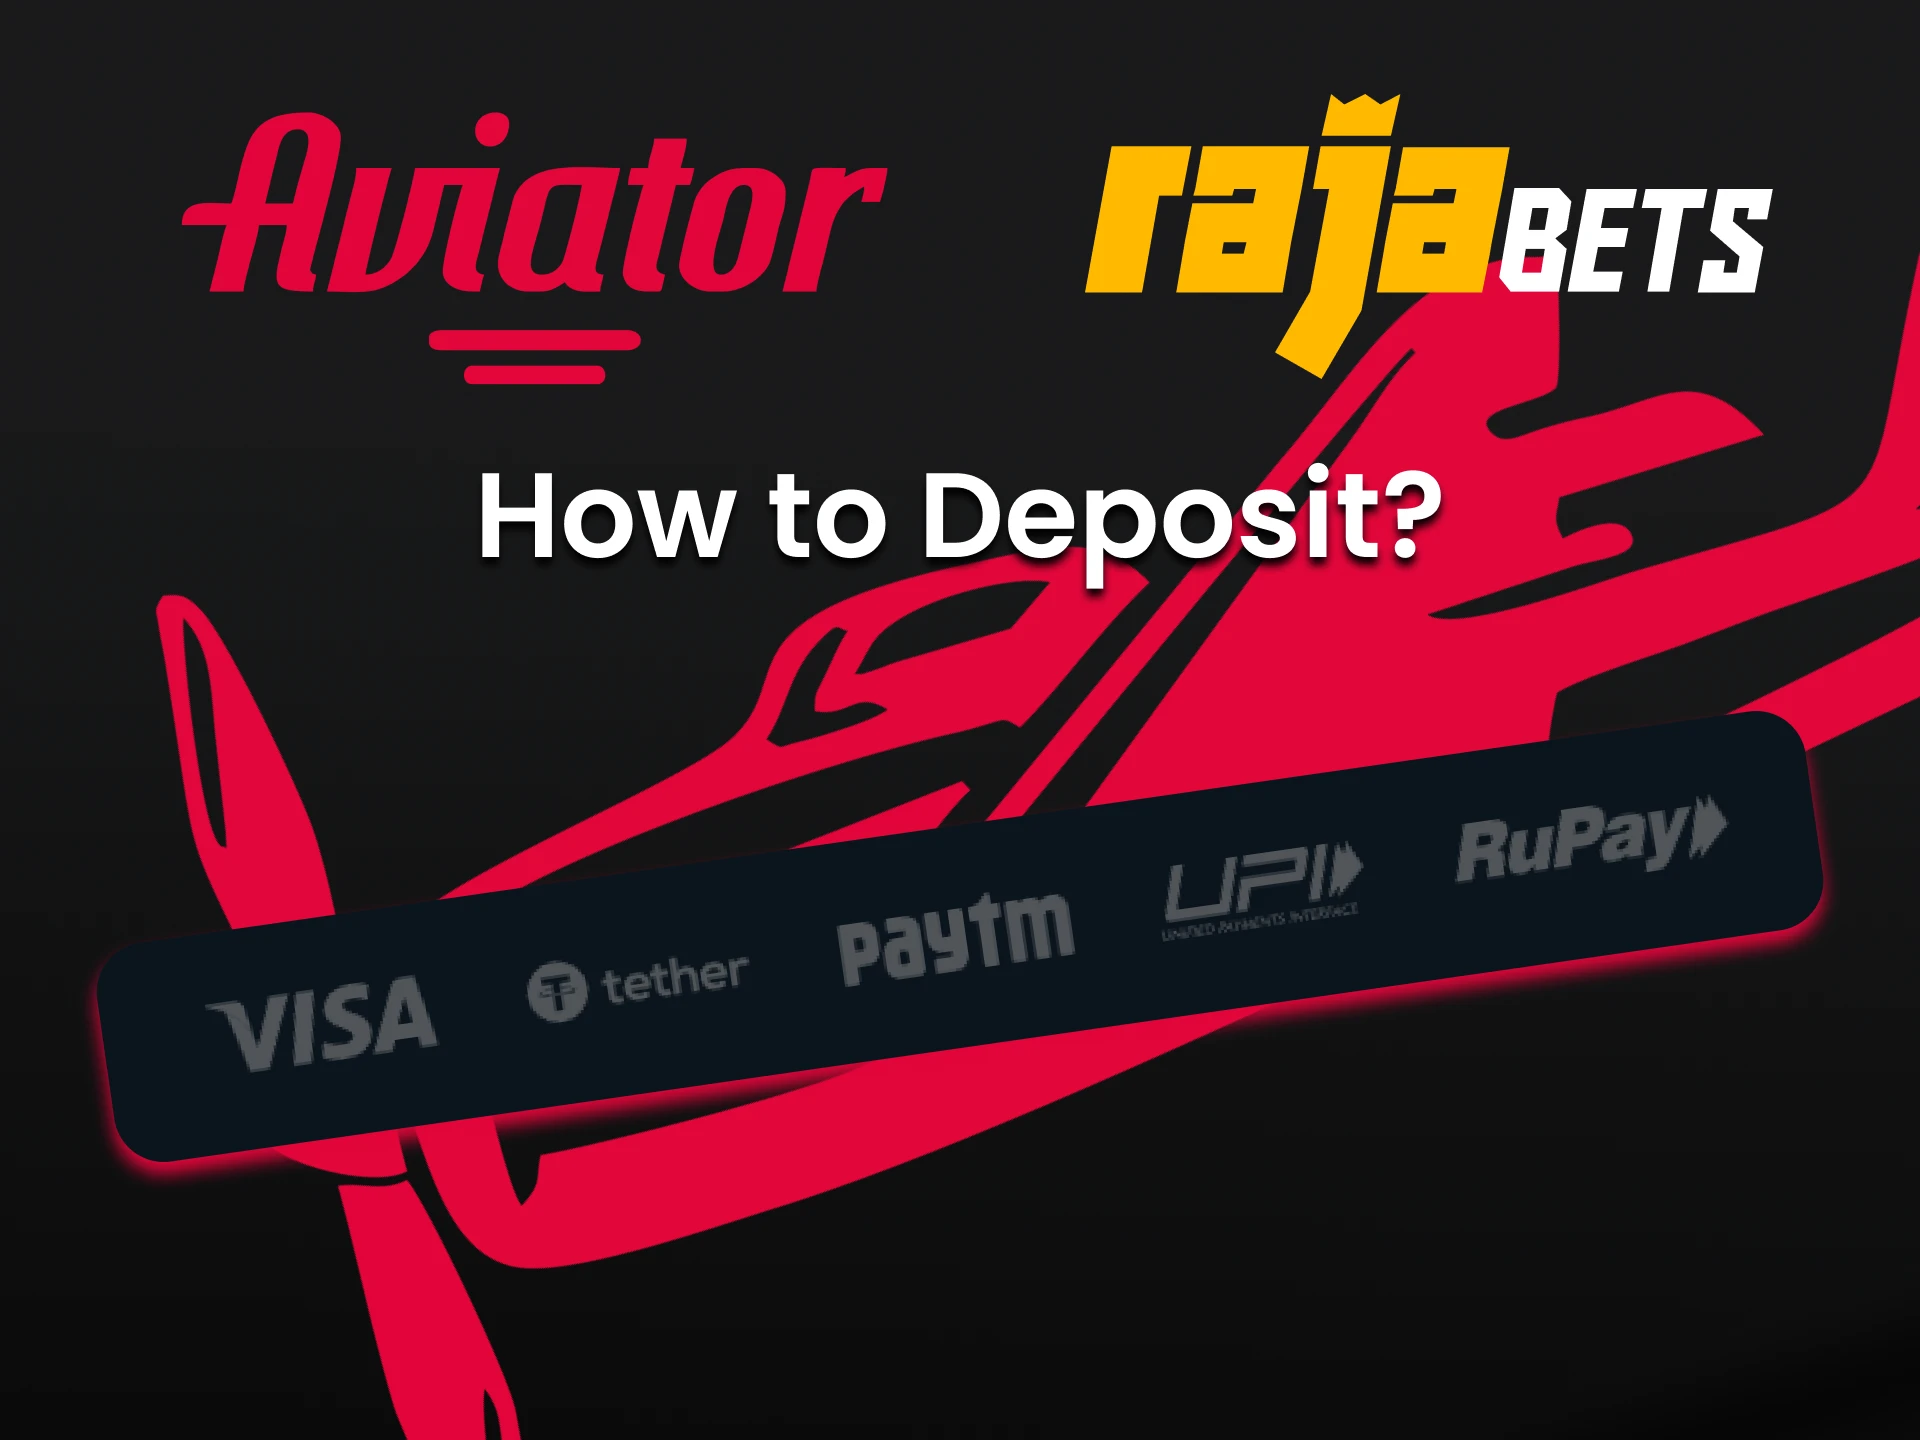 Top up your deposit to play Aviator on Rajabets.